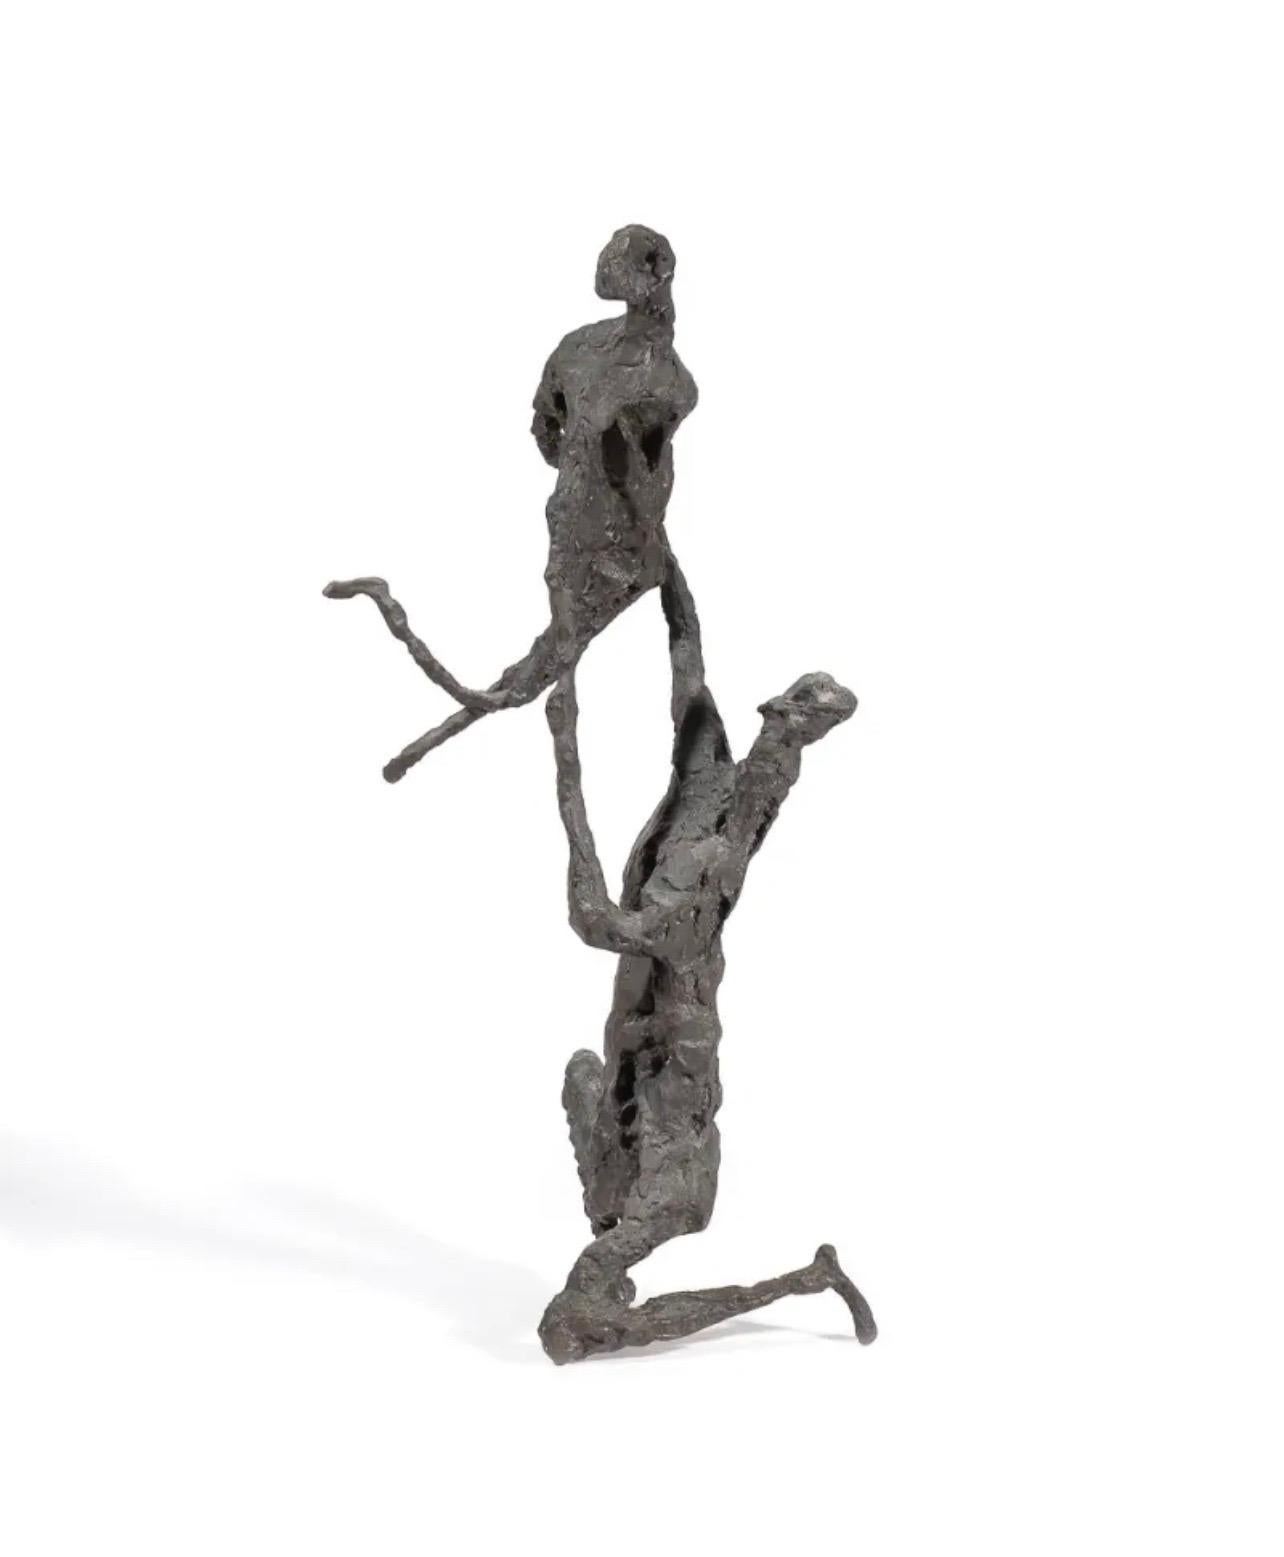 Untitled (it depicts acrobats, trapeze artists or gymnasts in mid pose) 
bronze cast sculpture
signed and numbered from small edition (1 of 3).

Gerard Koch was a French Post War & Contemporary sculptor who was born in 1926. 
Gérard Koch, born on